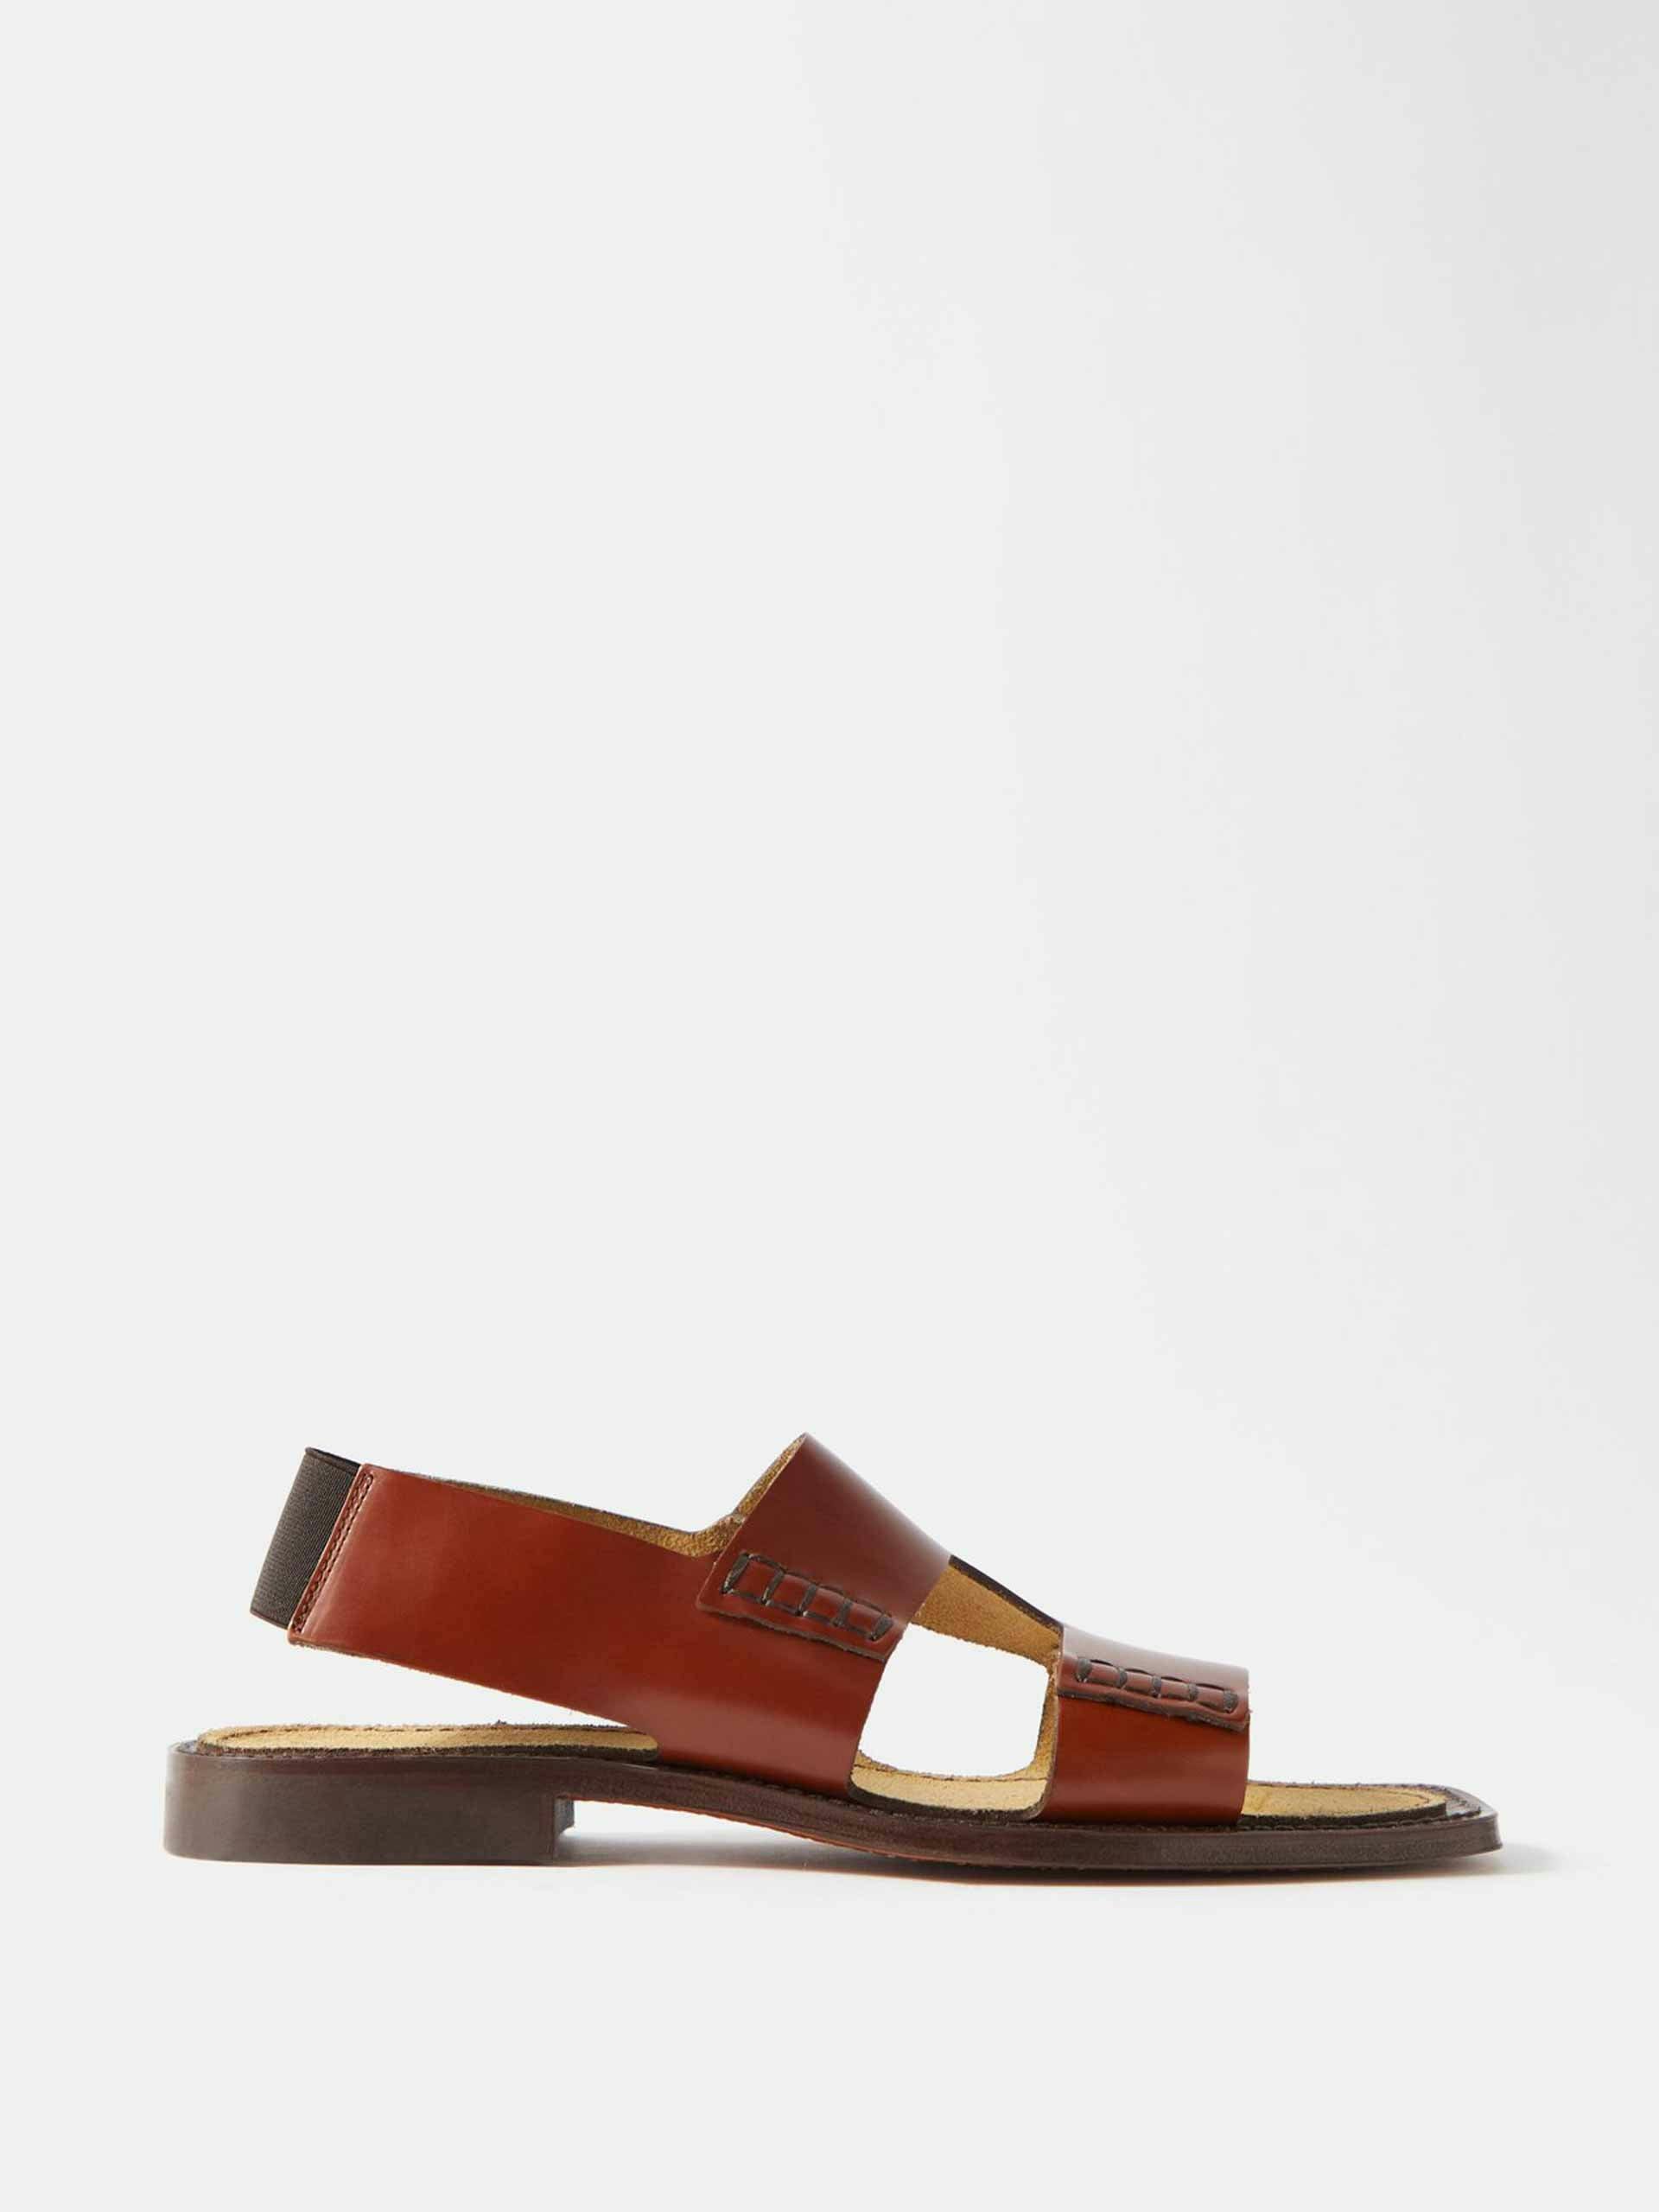 Cut out leather sandals